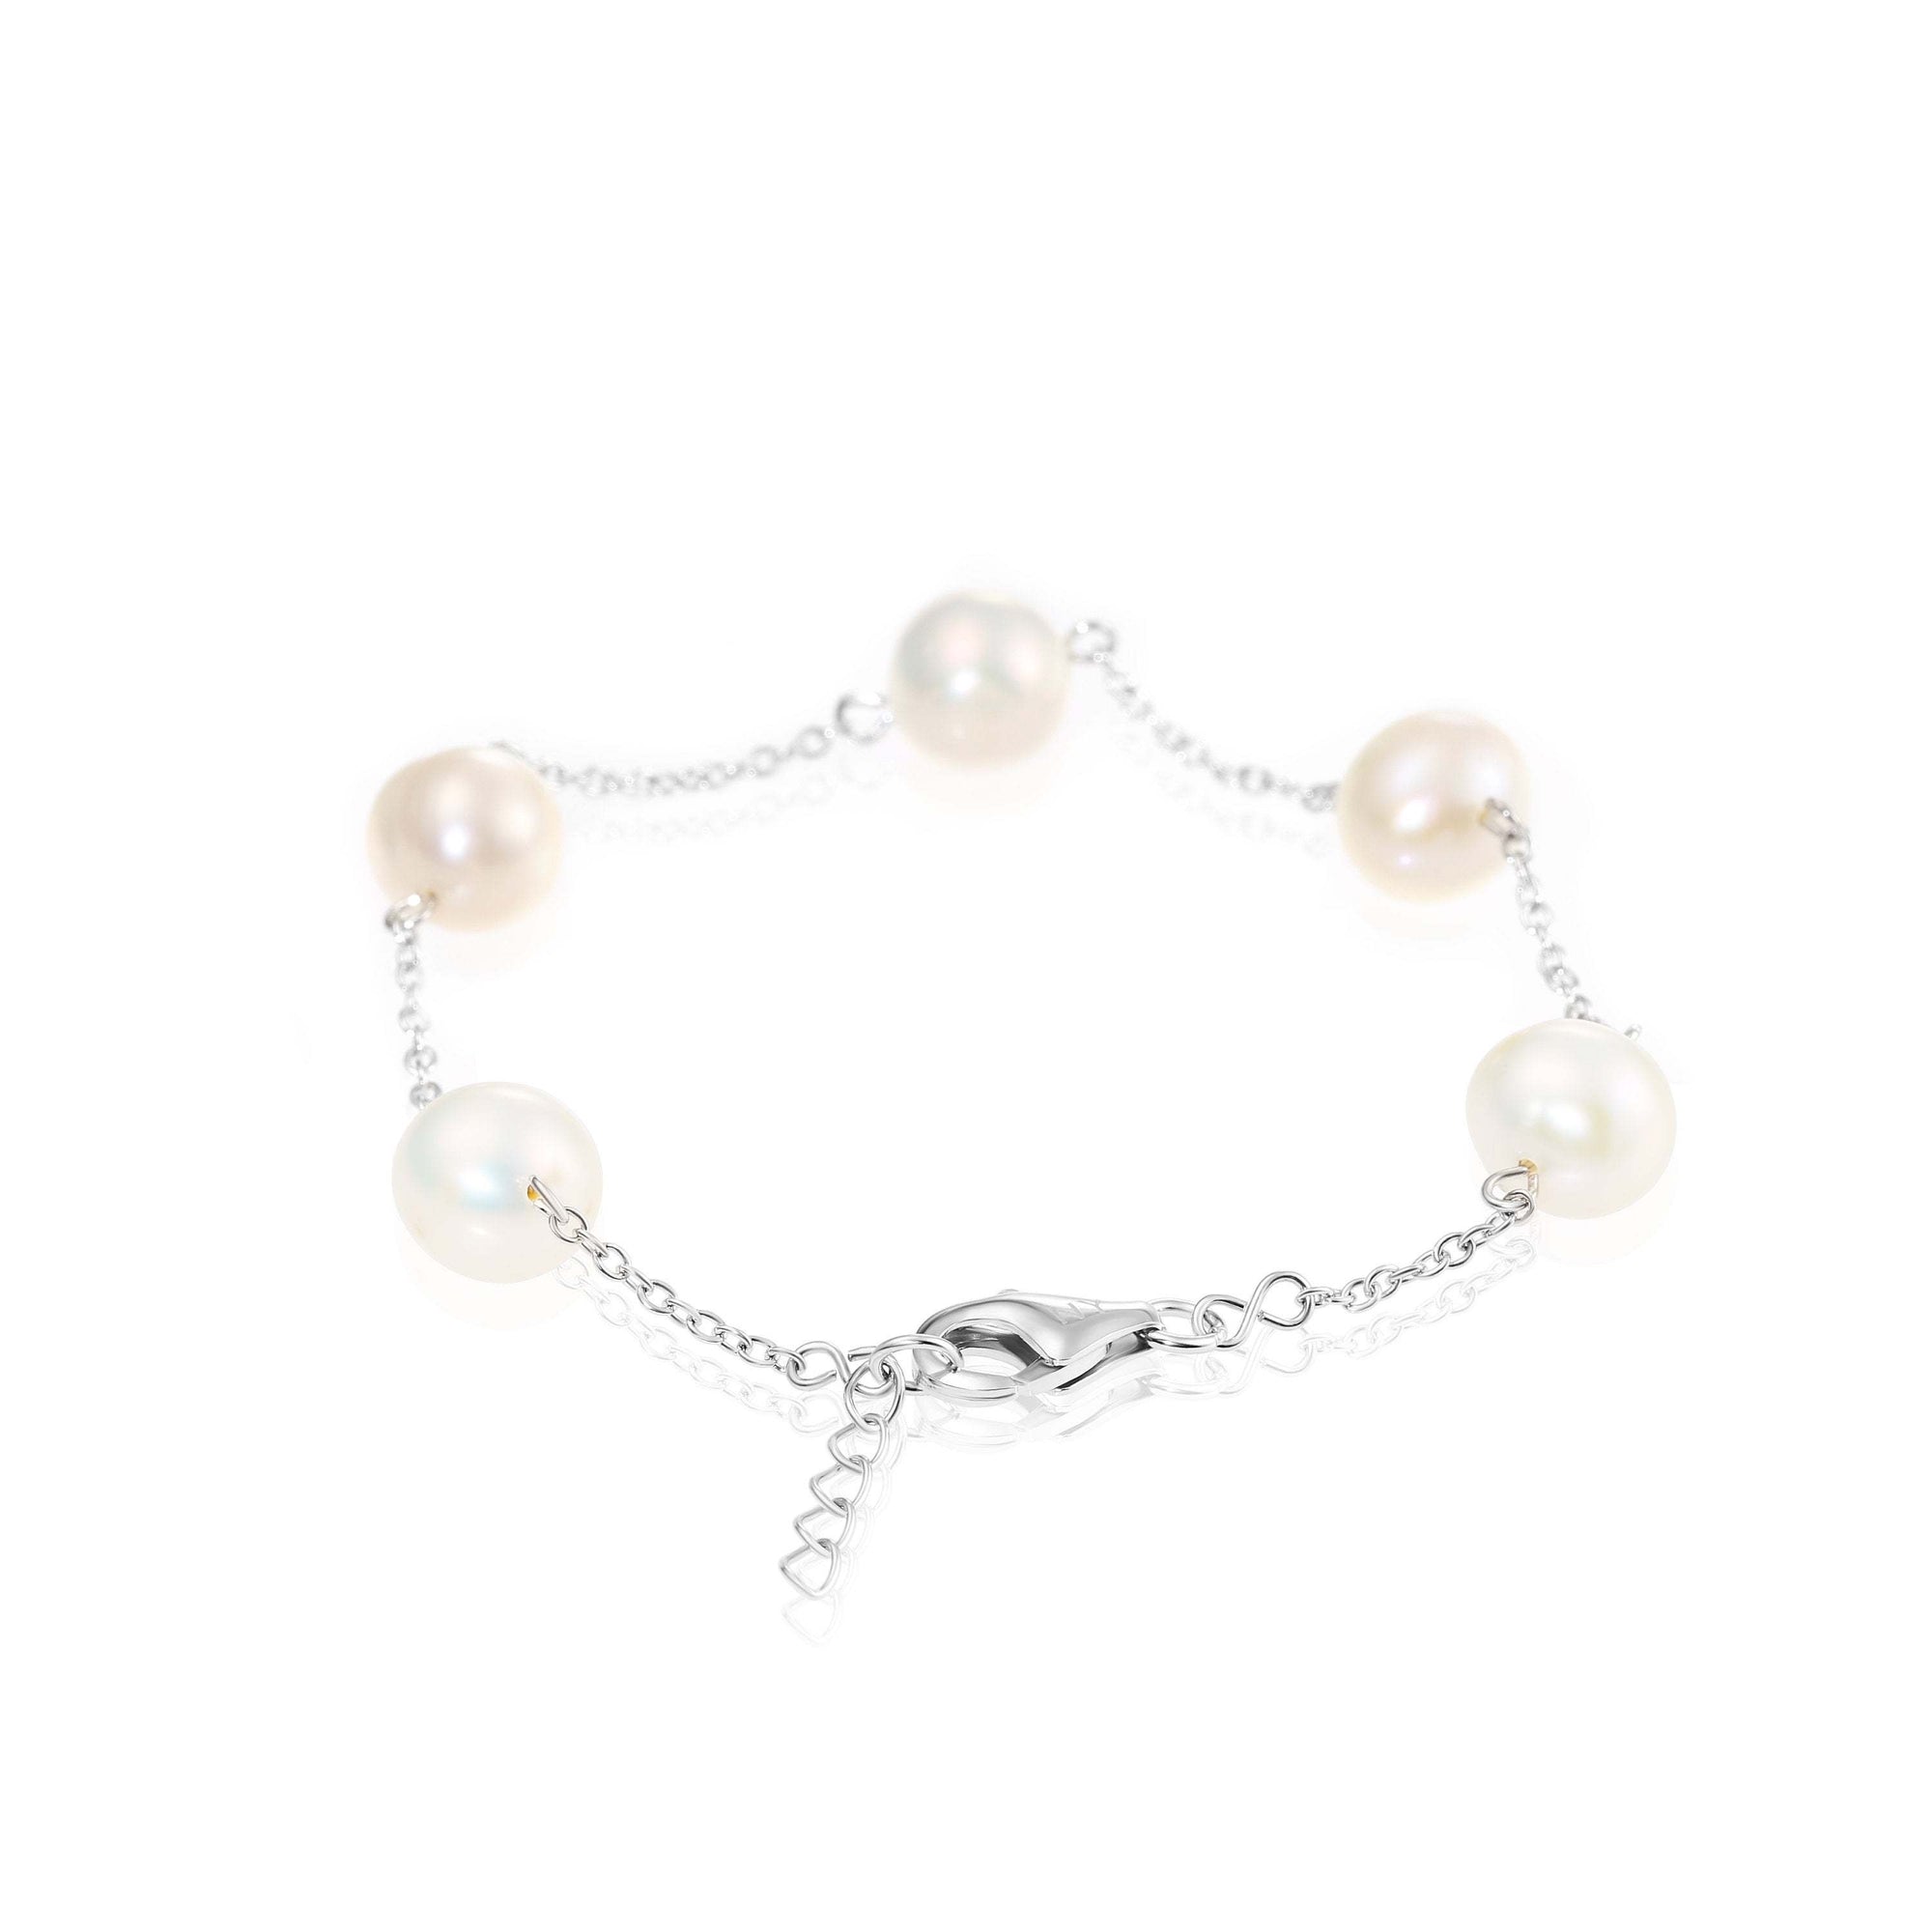 Pearl Bracelet in , White Freshwater Cultured Pearls, Adjustable Size in Sterling Silver